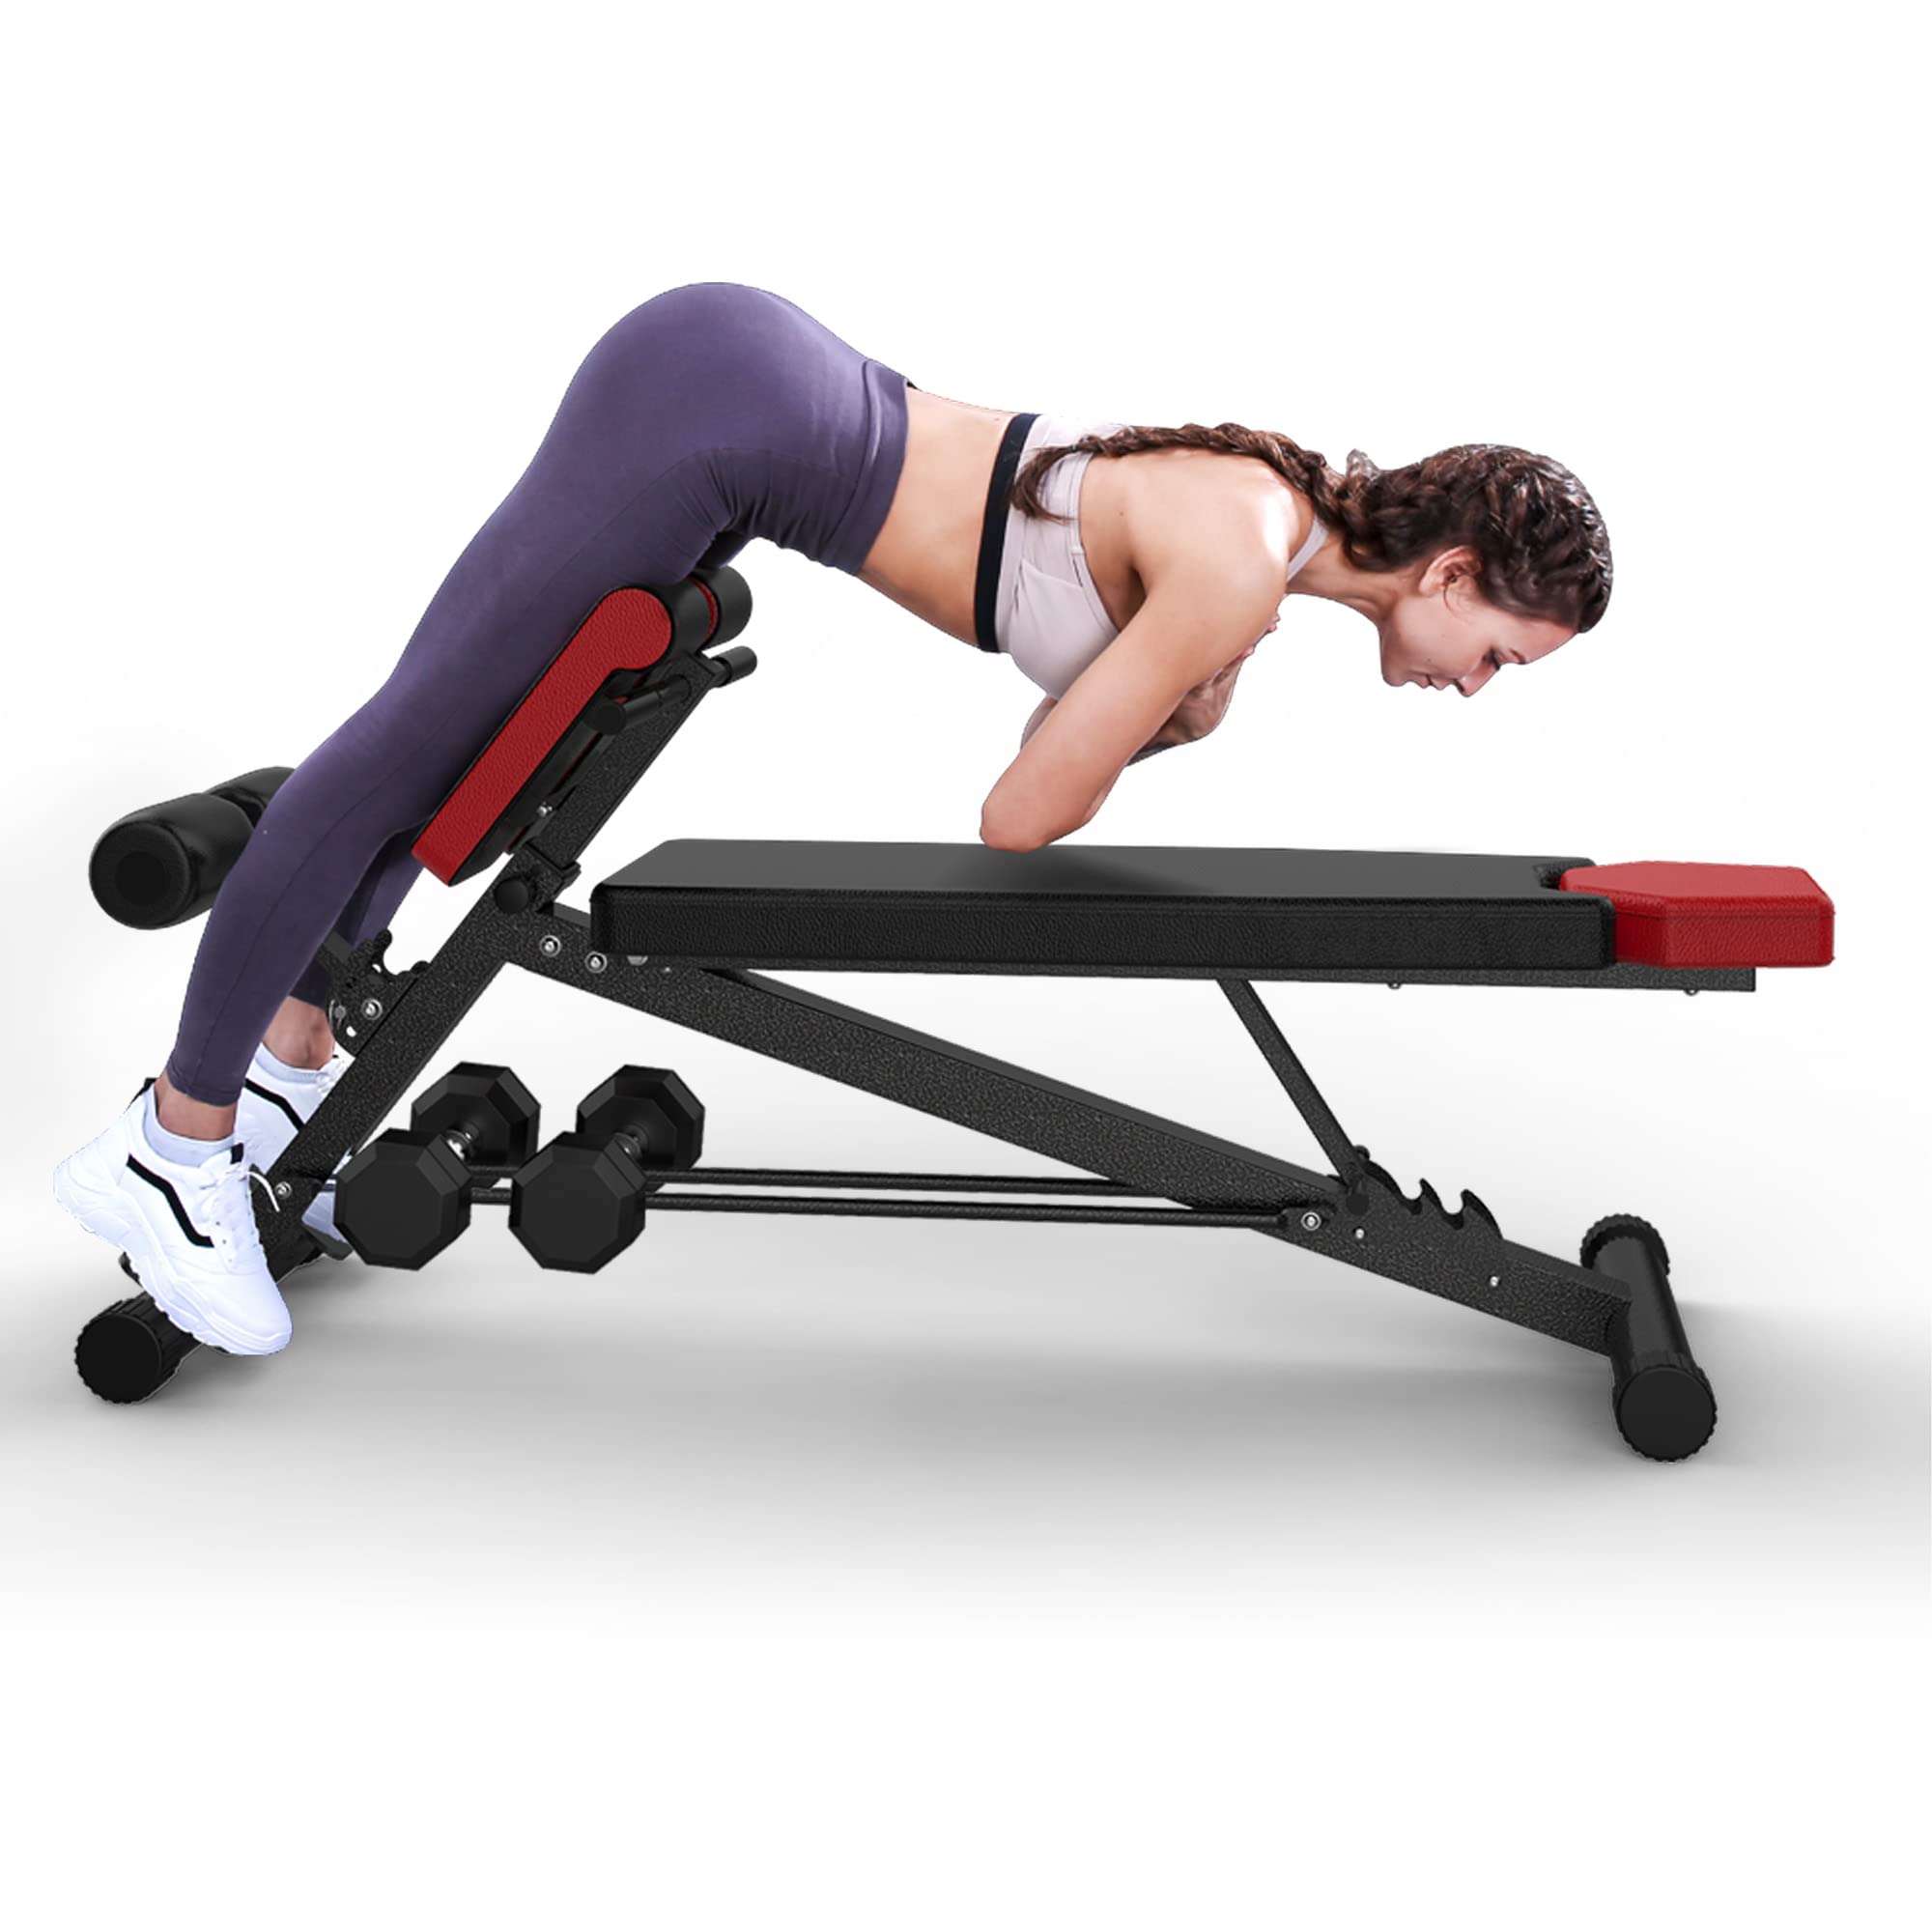  FF Finer Form FINER FORM Multi-Functional Adjustable Weight Bench for Total Body Workout – Hyper Back Extension, Roman Chair, Adjustable Ab Sit up Bench, Decline Bench, Flat Bench. Perfect Workout...